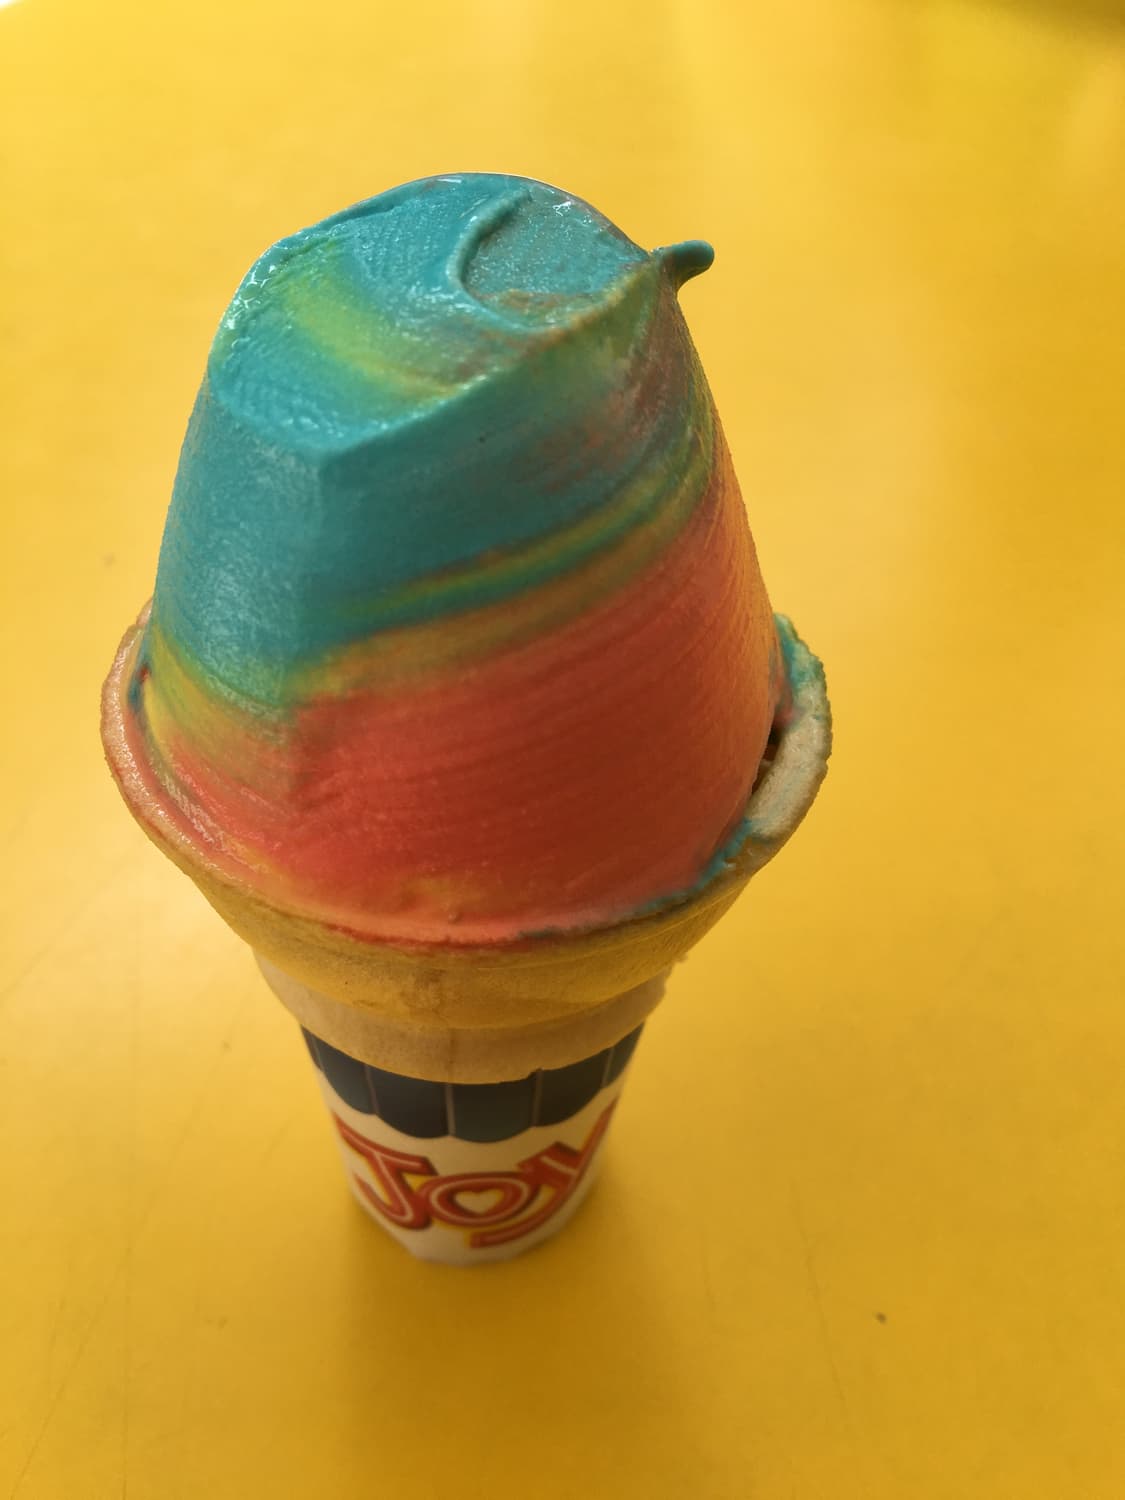 superman ice cream in a cone. pink, yellow and blue colored ice cream cone sitting on a yellow background